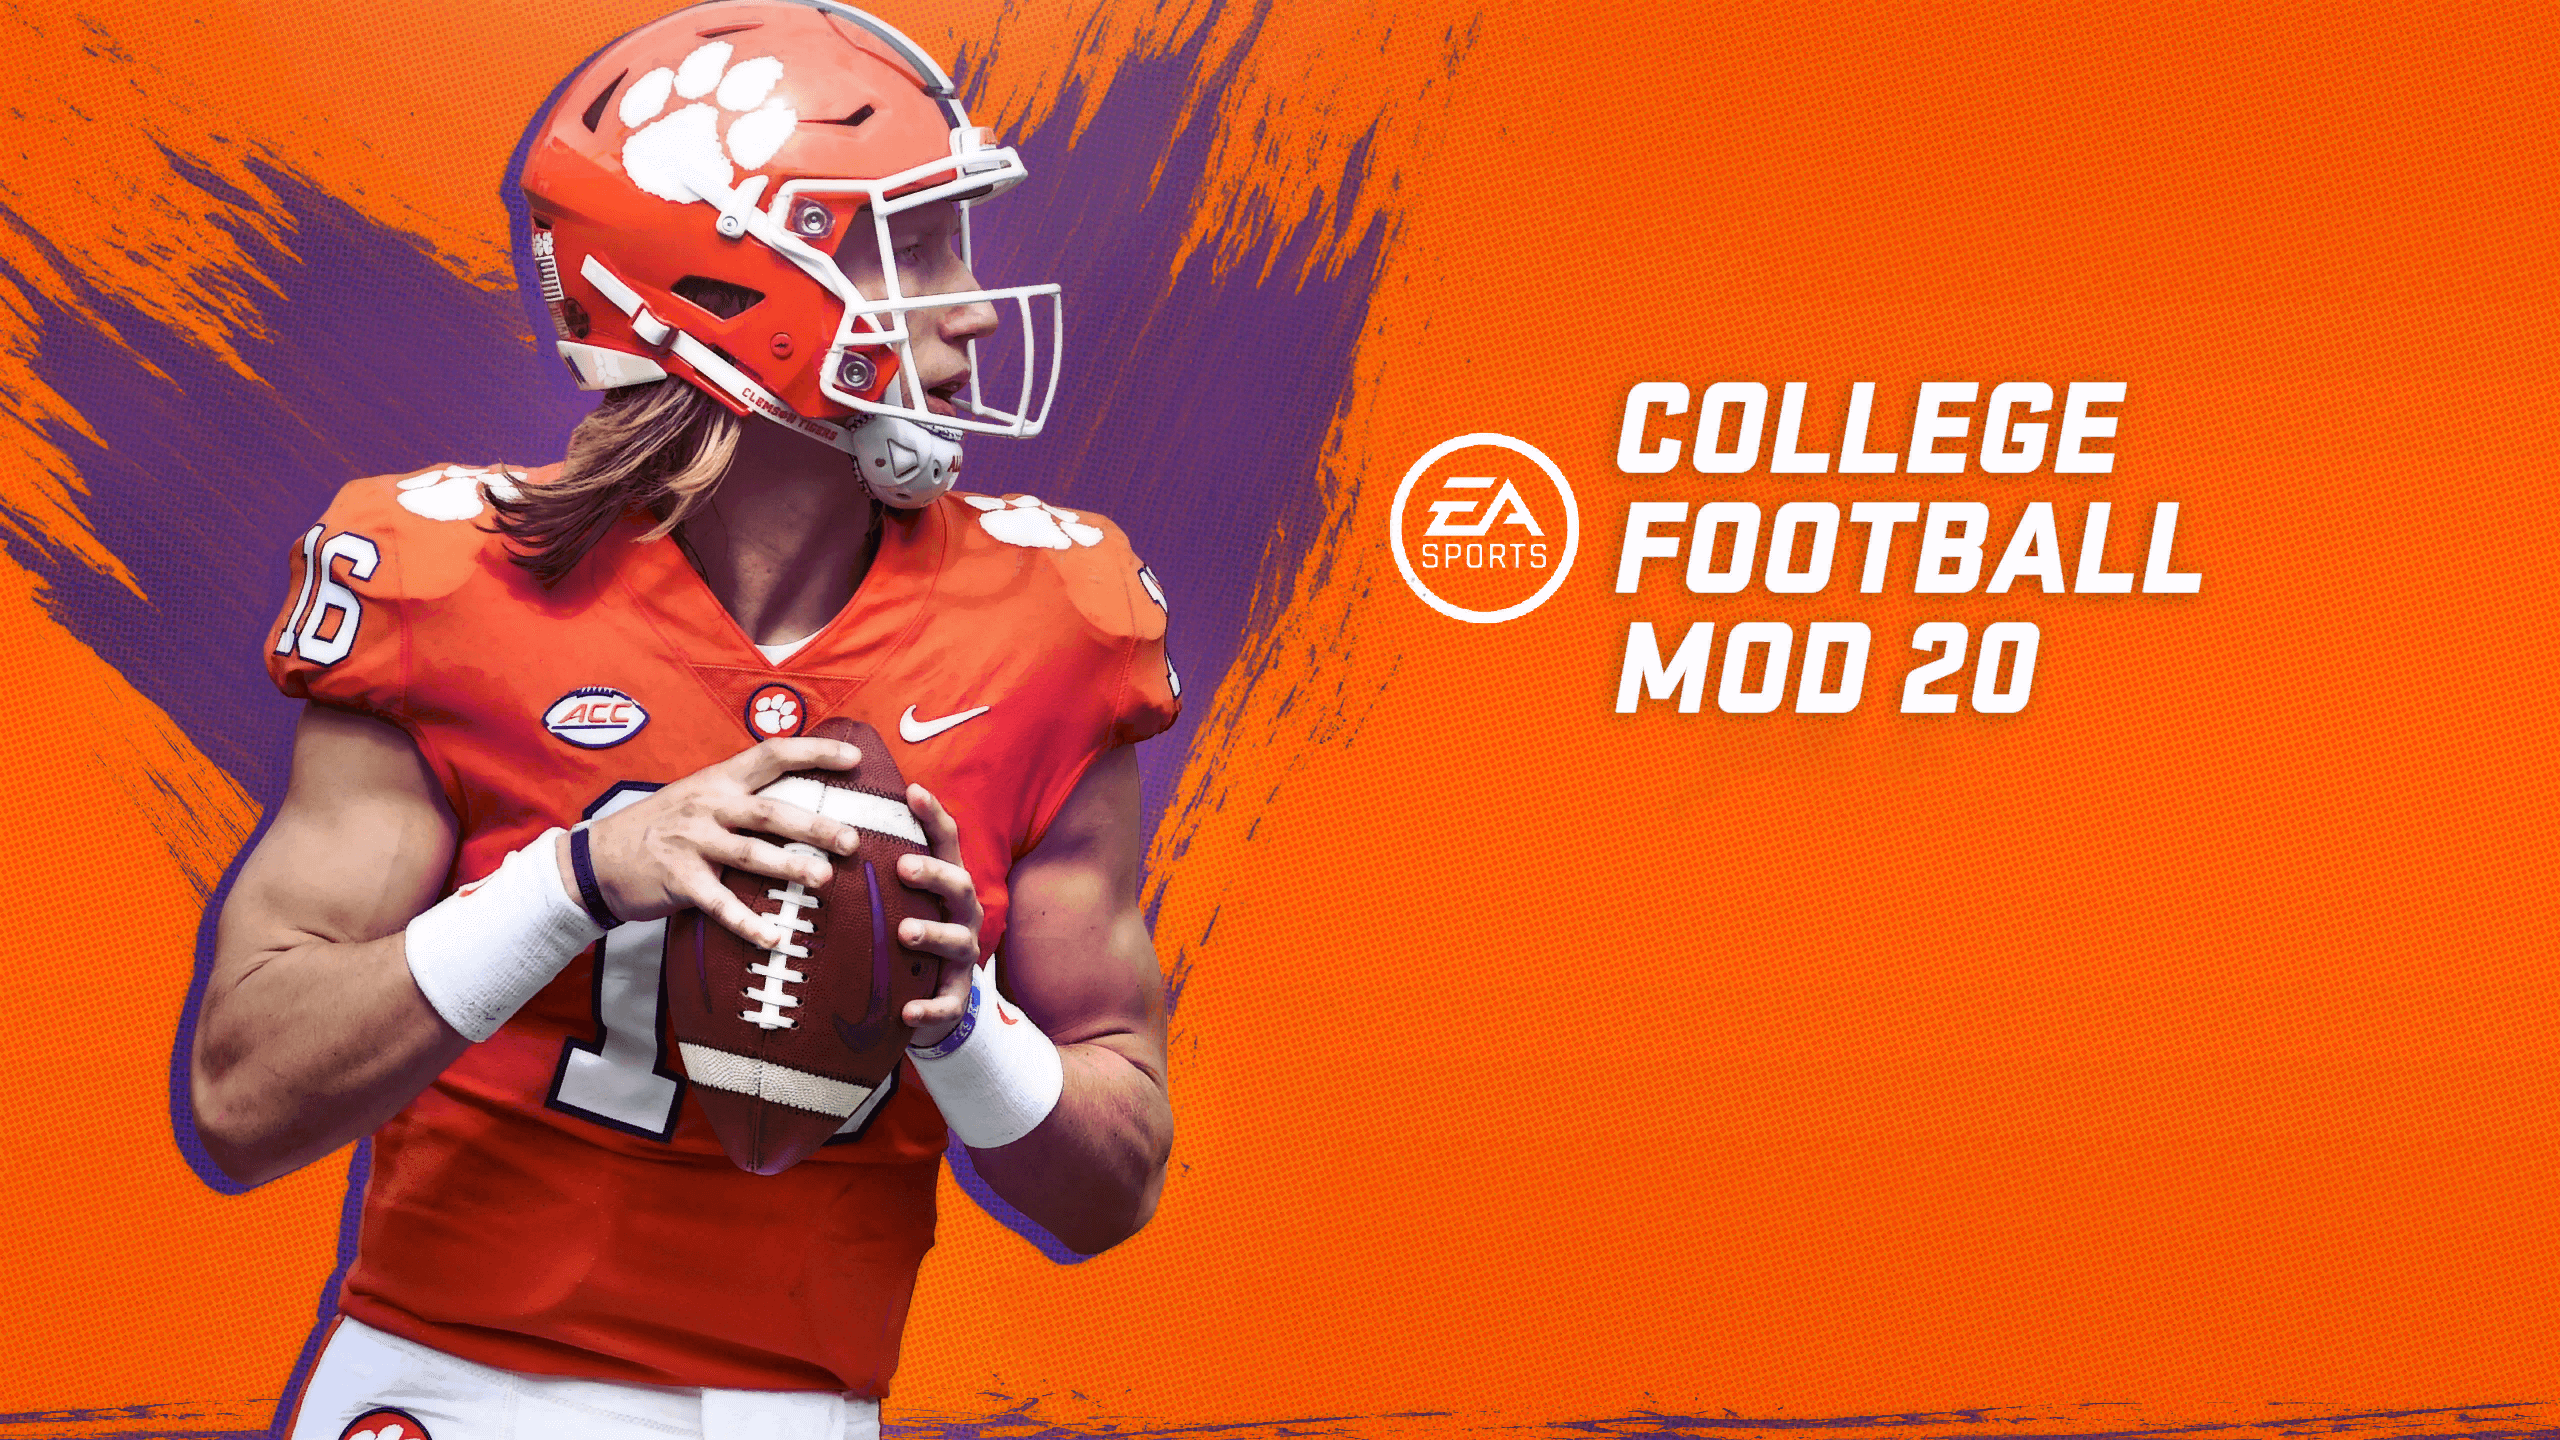 Savant Slange regional College Football Mod 20 v1.3 Available For Madden NFL 20 PC Users -  Operation Sports